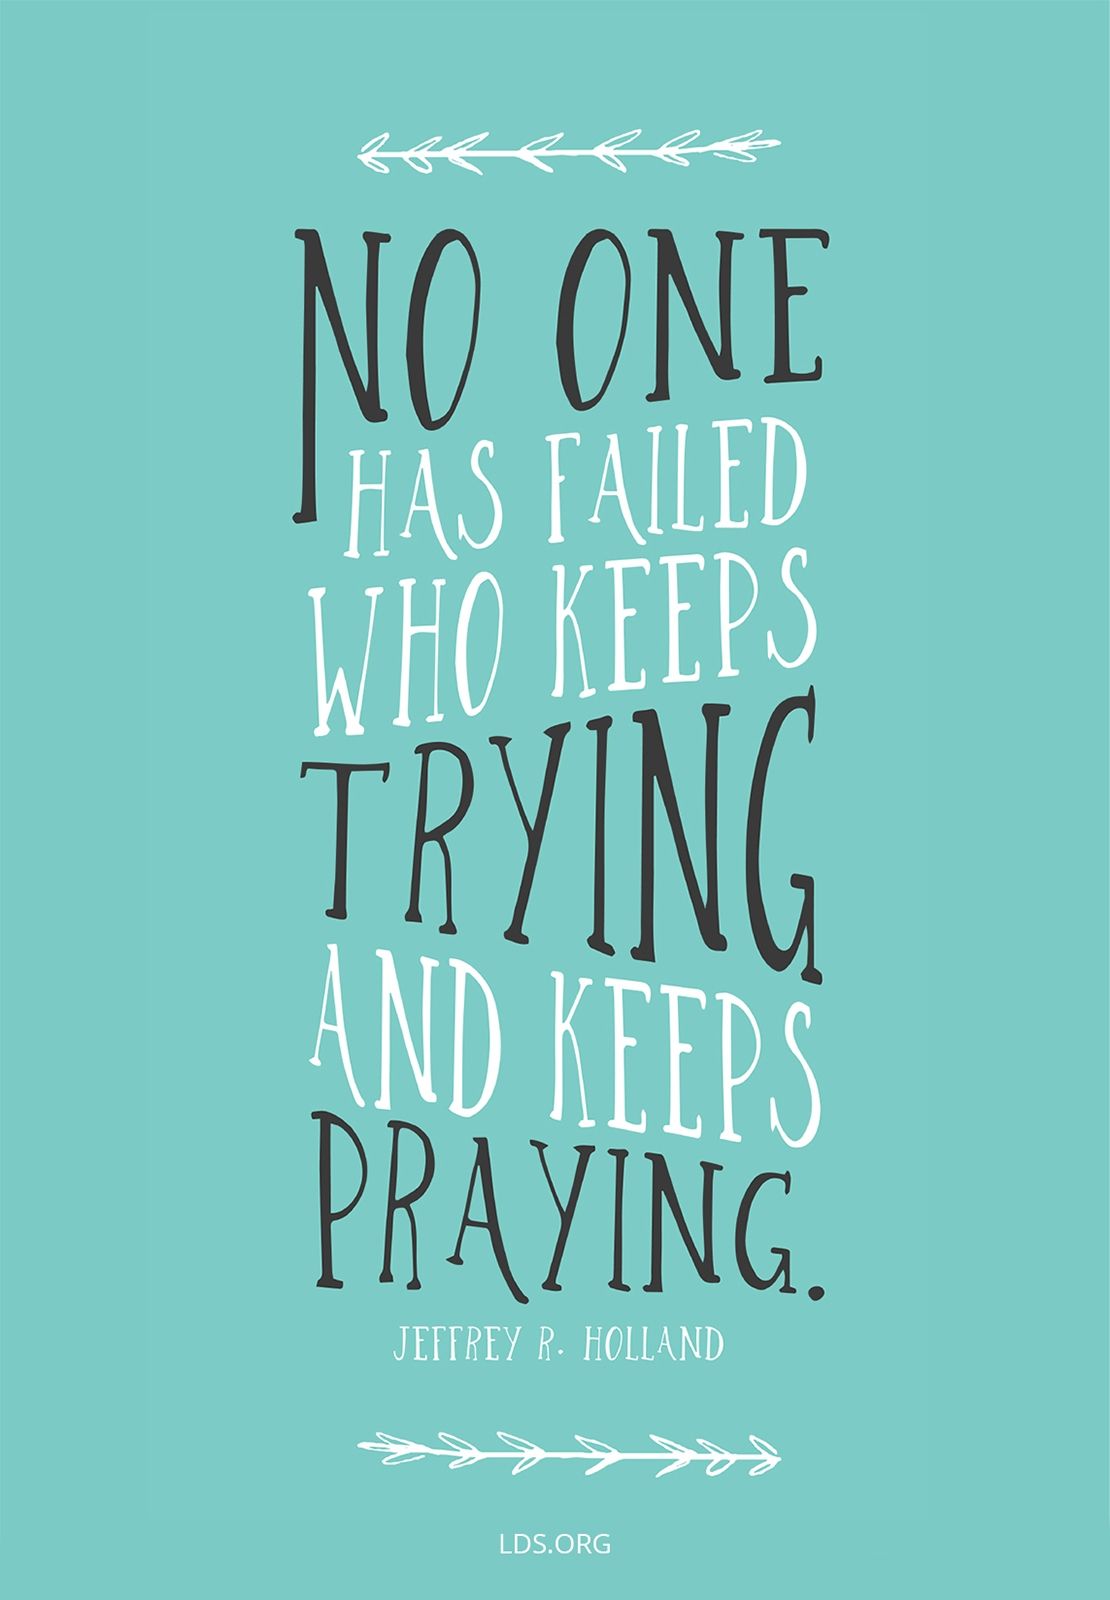 “No one has failed who keeps trying and keeps praying.” —Elder Jeffrey R. Holland, “Because She Is a Mother”